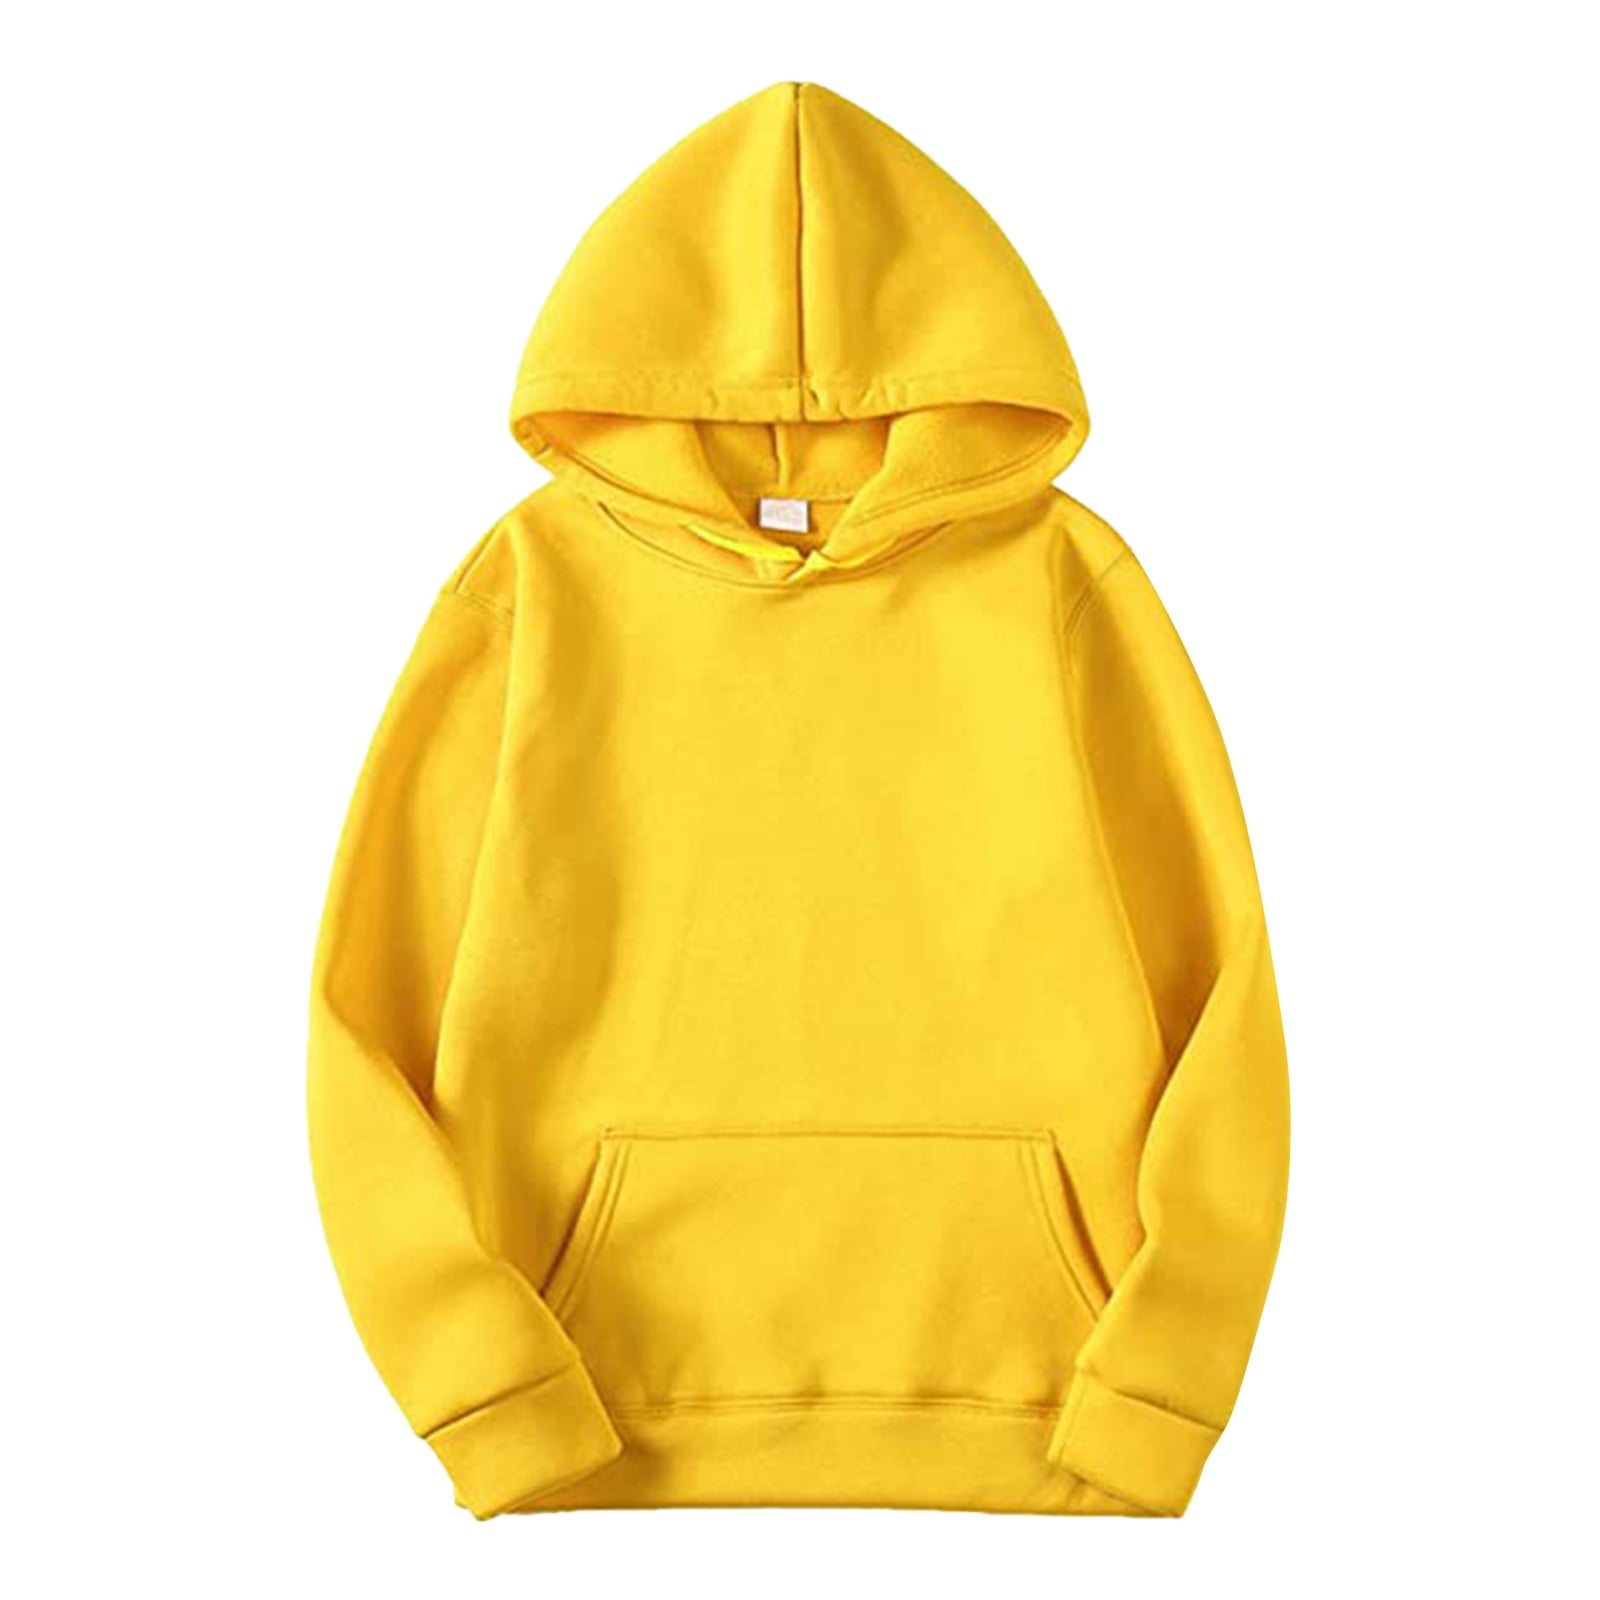 Yellow Hoodies Men And Women Blouse Shirt Autumn And Winter Leisure Hooded  Sweater Solid Color Sweater Soft Top Blouse 